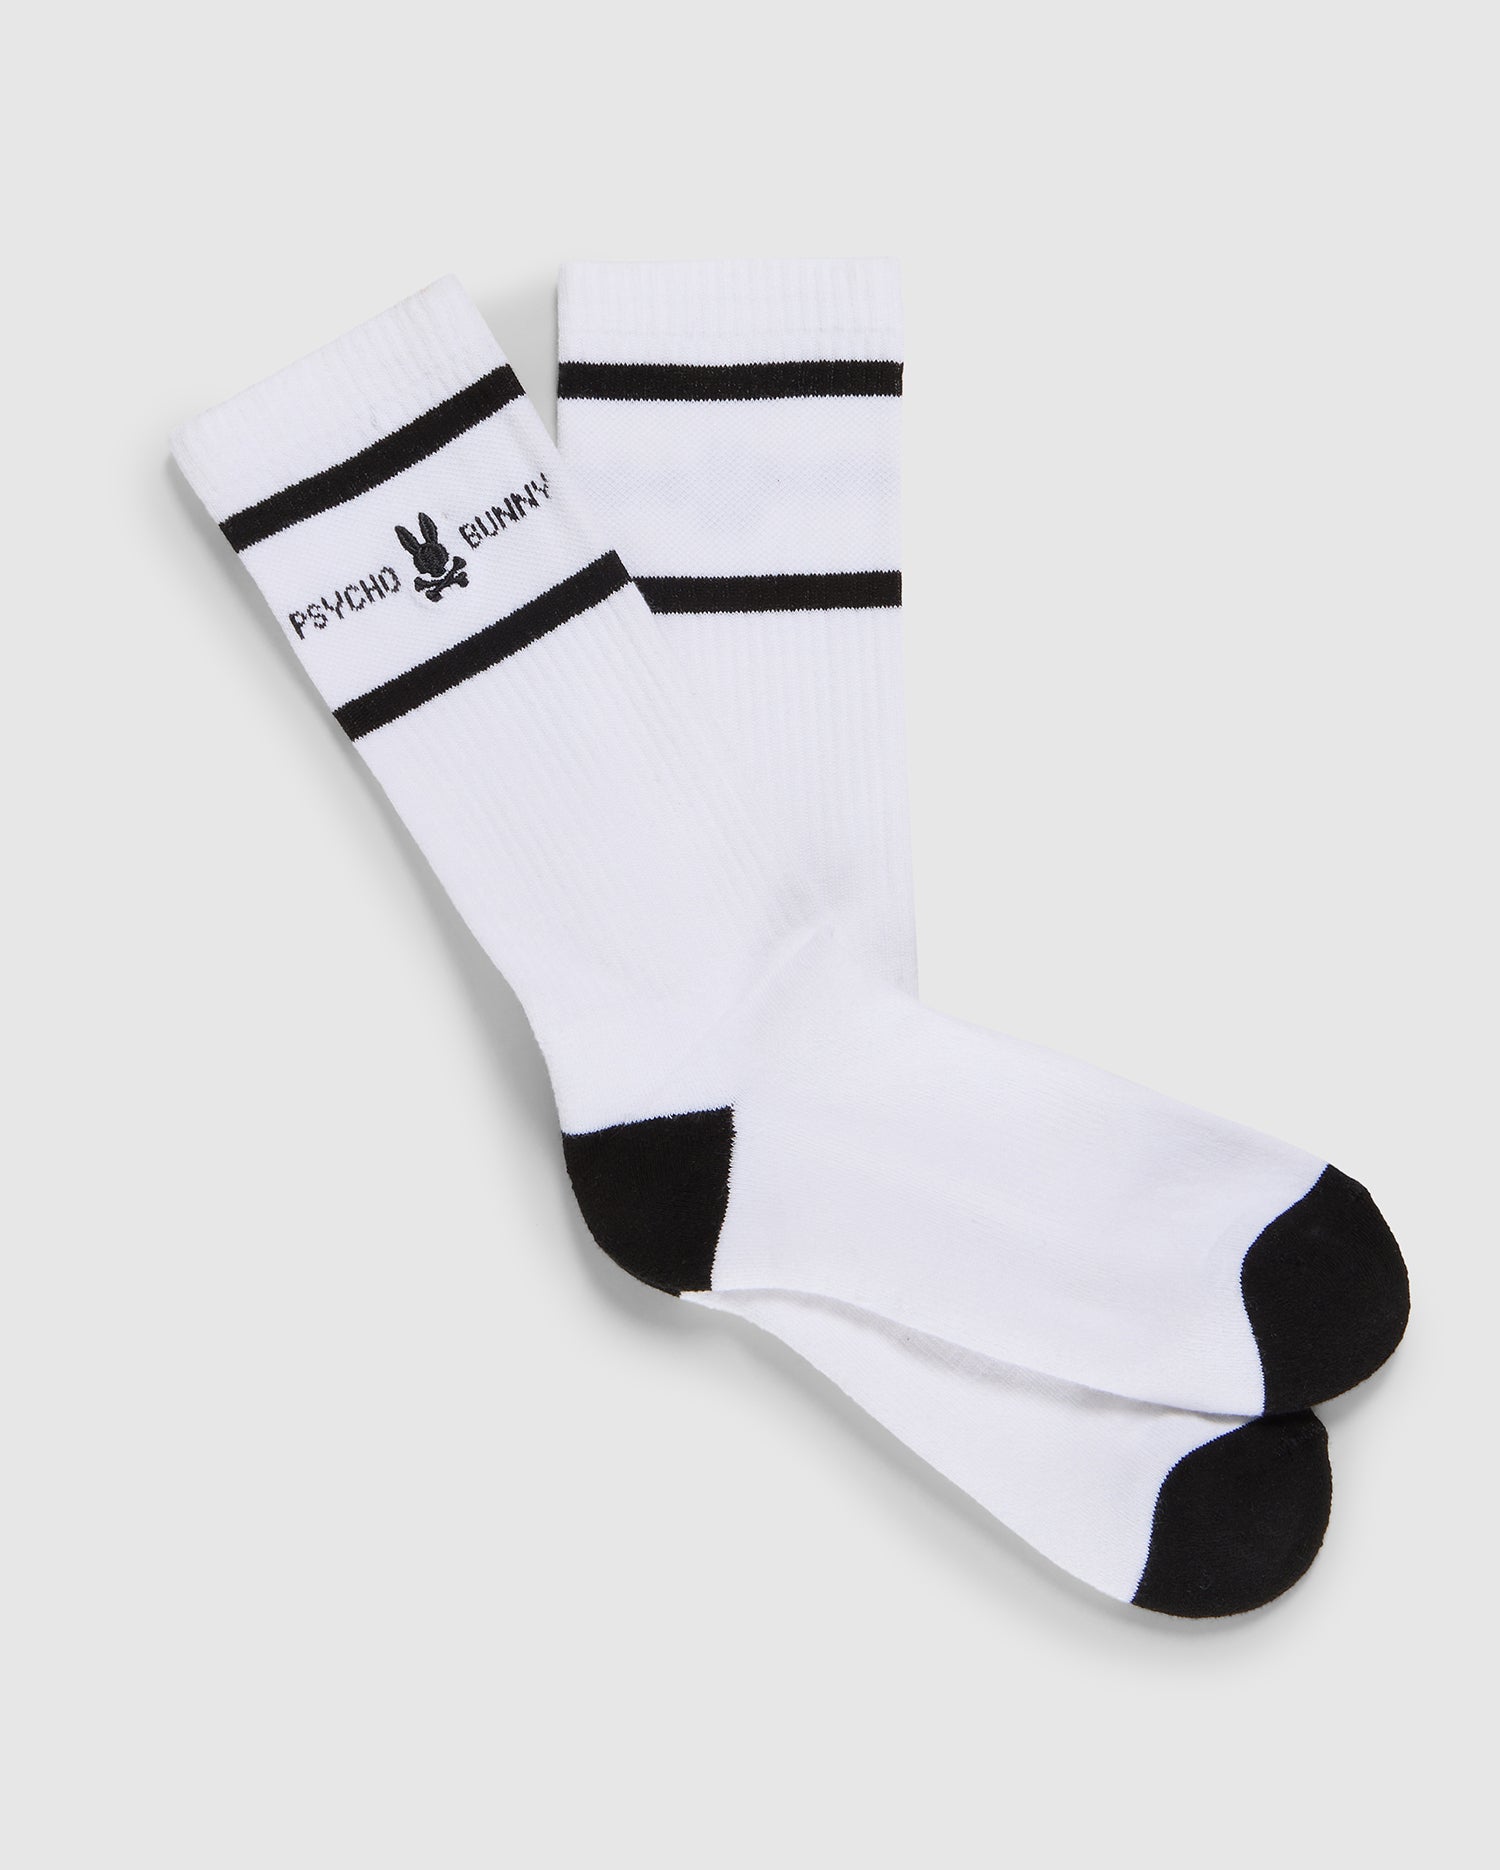 A pair of white crew socks with black toes and heels, made from Pima cotton, featuring two horizontal black stripes and a Psycho Bunny logo near the ribbed cuff on a plain background.